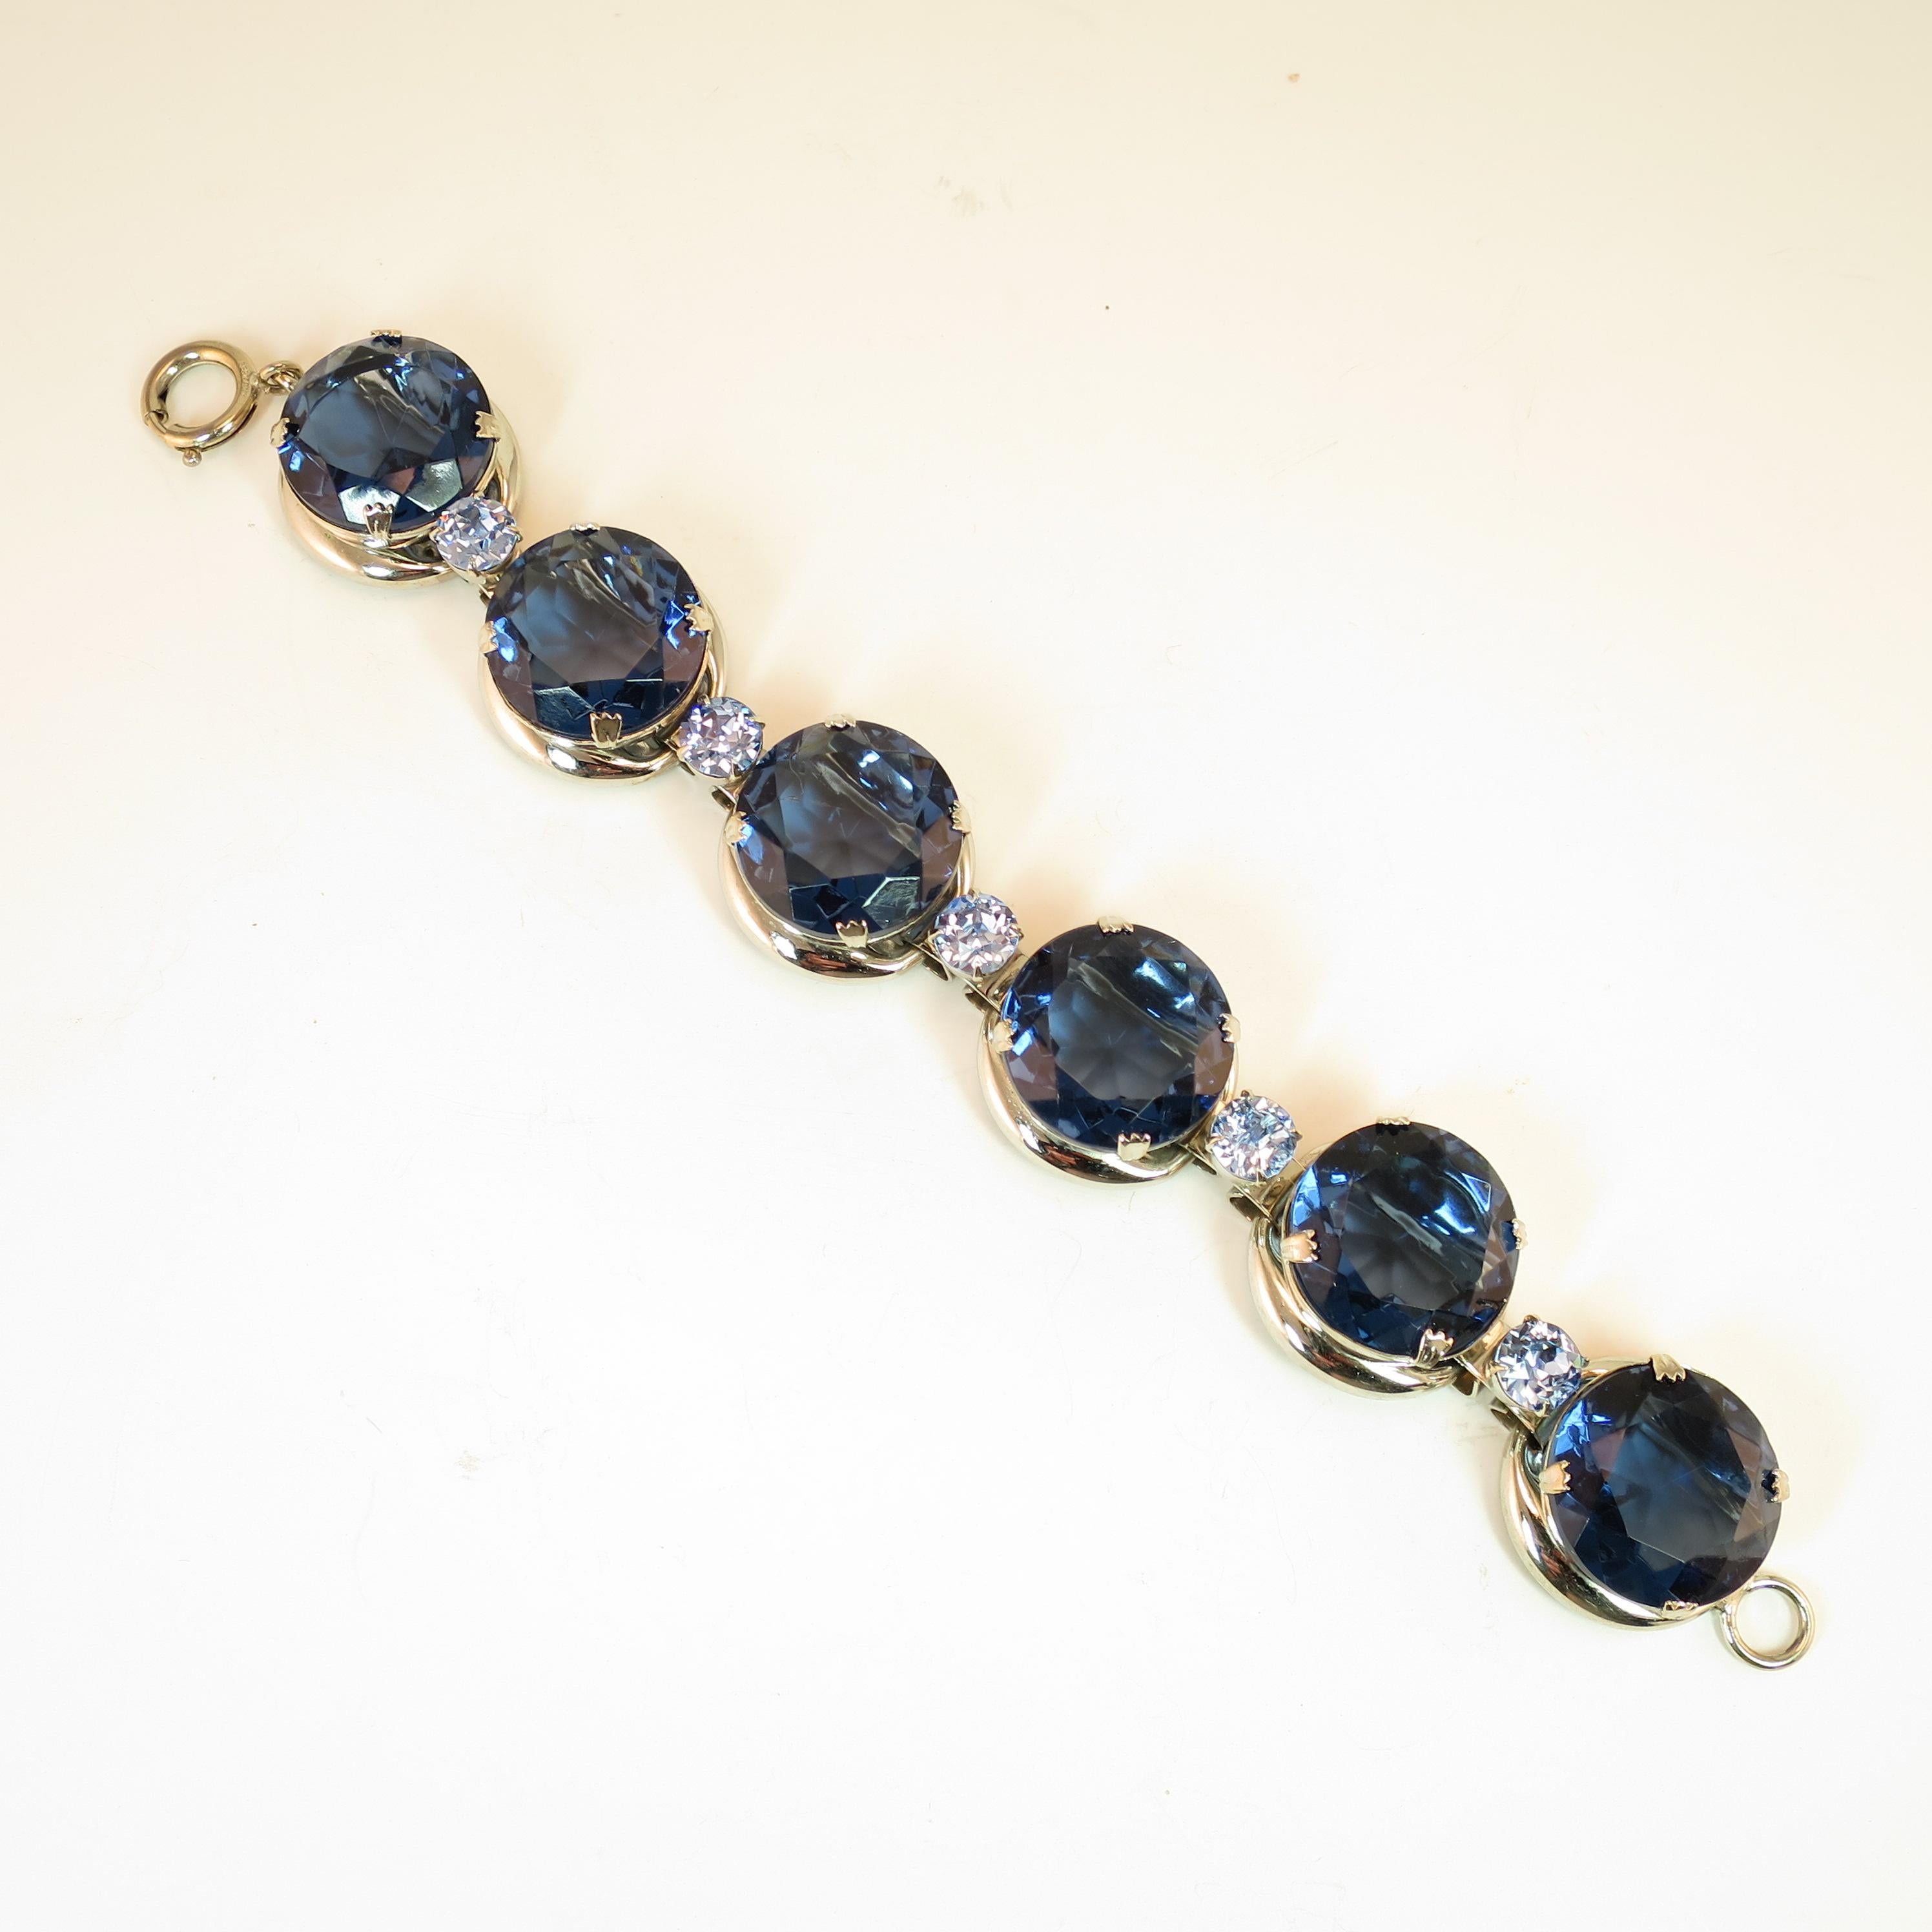 Offered here is a massive German silver-plated link bracelet featuring sapphire headlamp crystals, from the 1950s. Round stations have a base platform with a rectangular opening underneath a deep cup setting, allowing light to shine through the